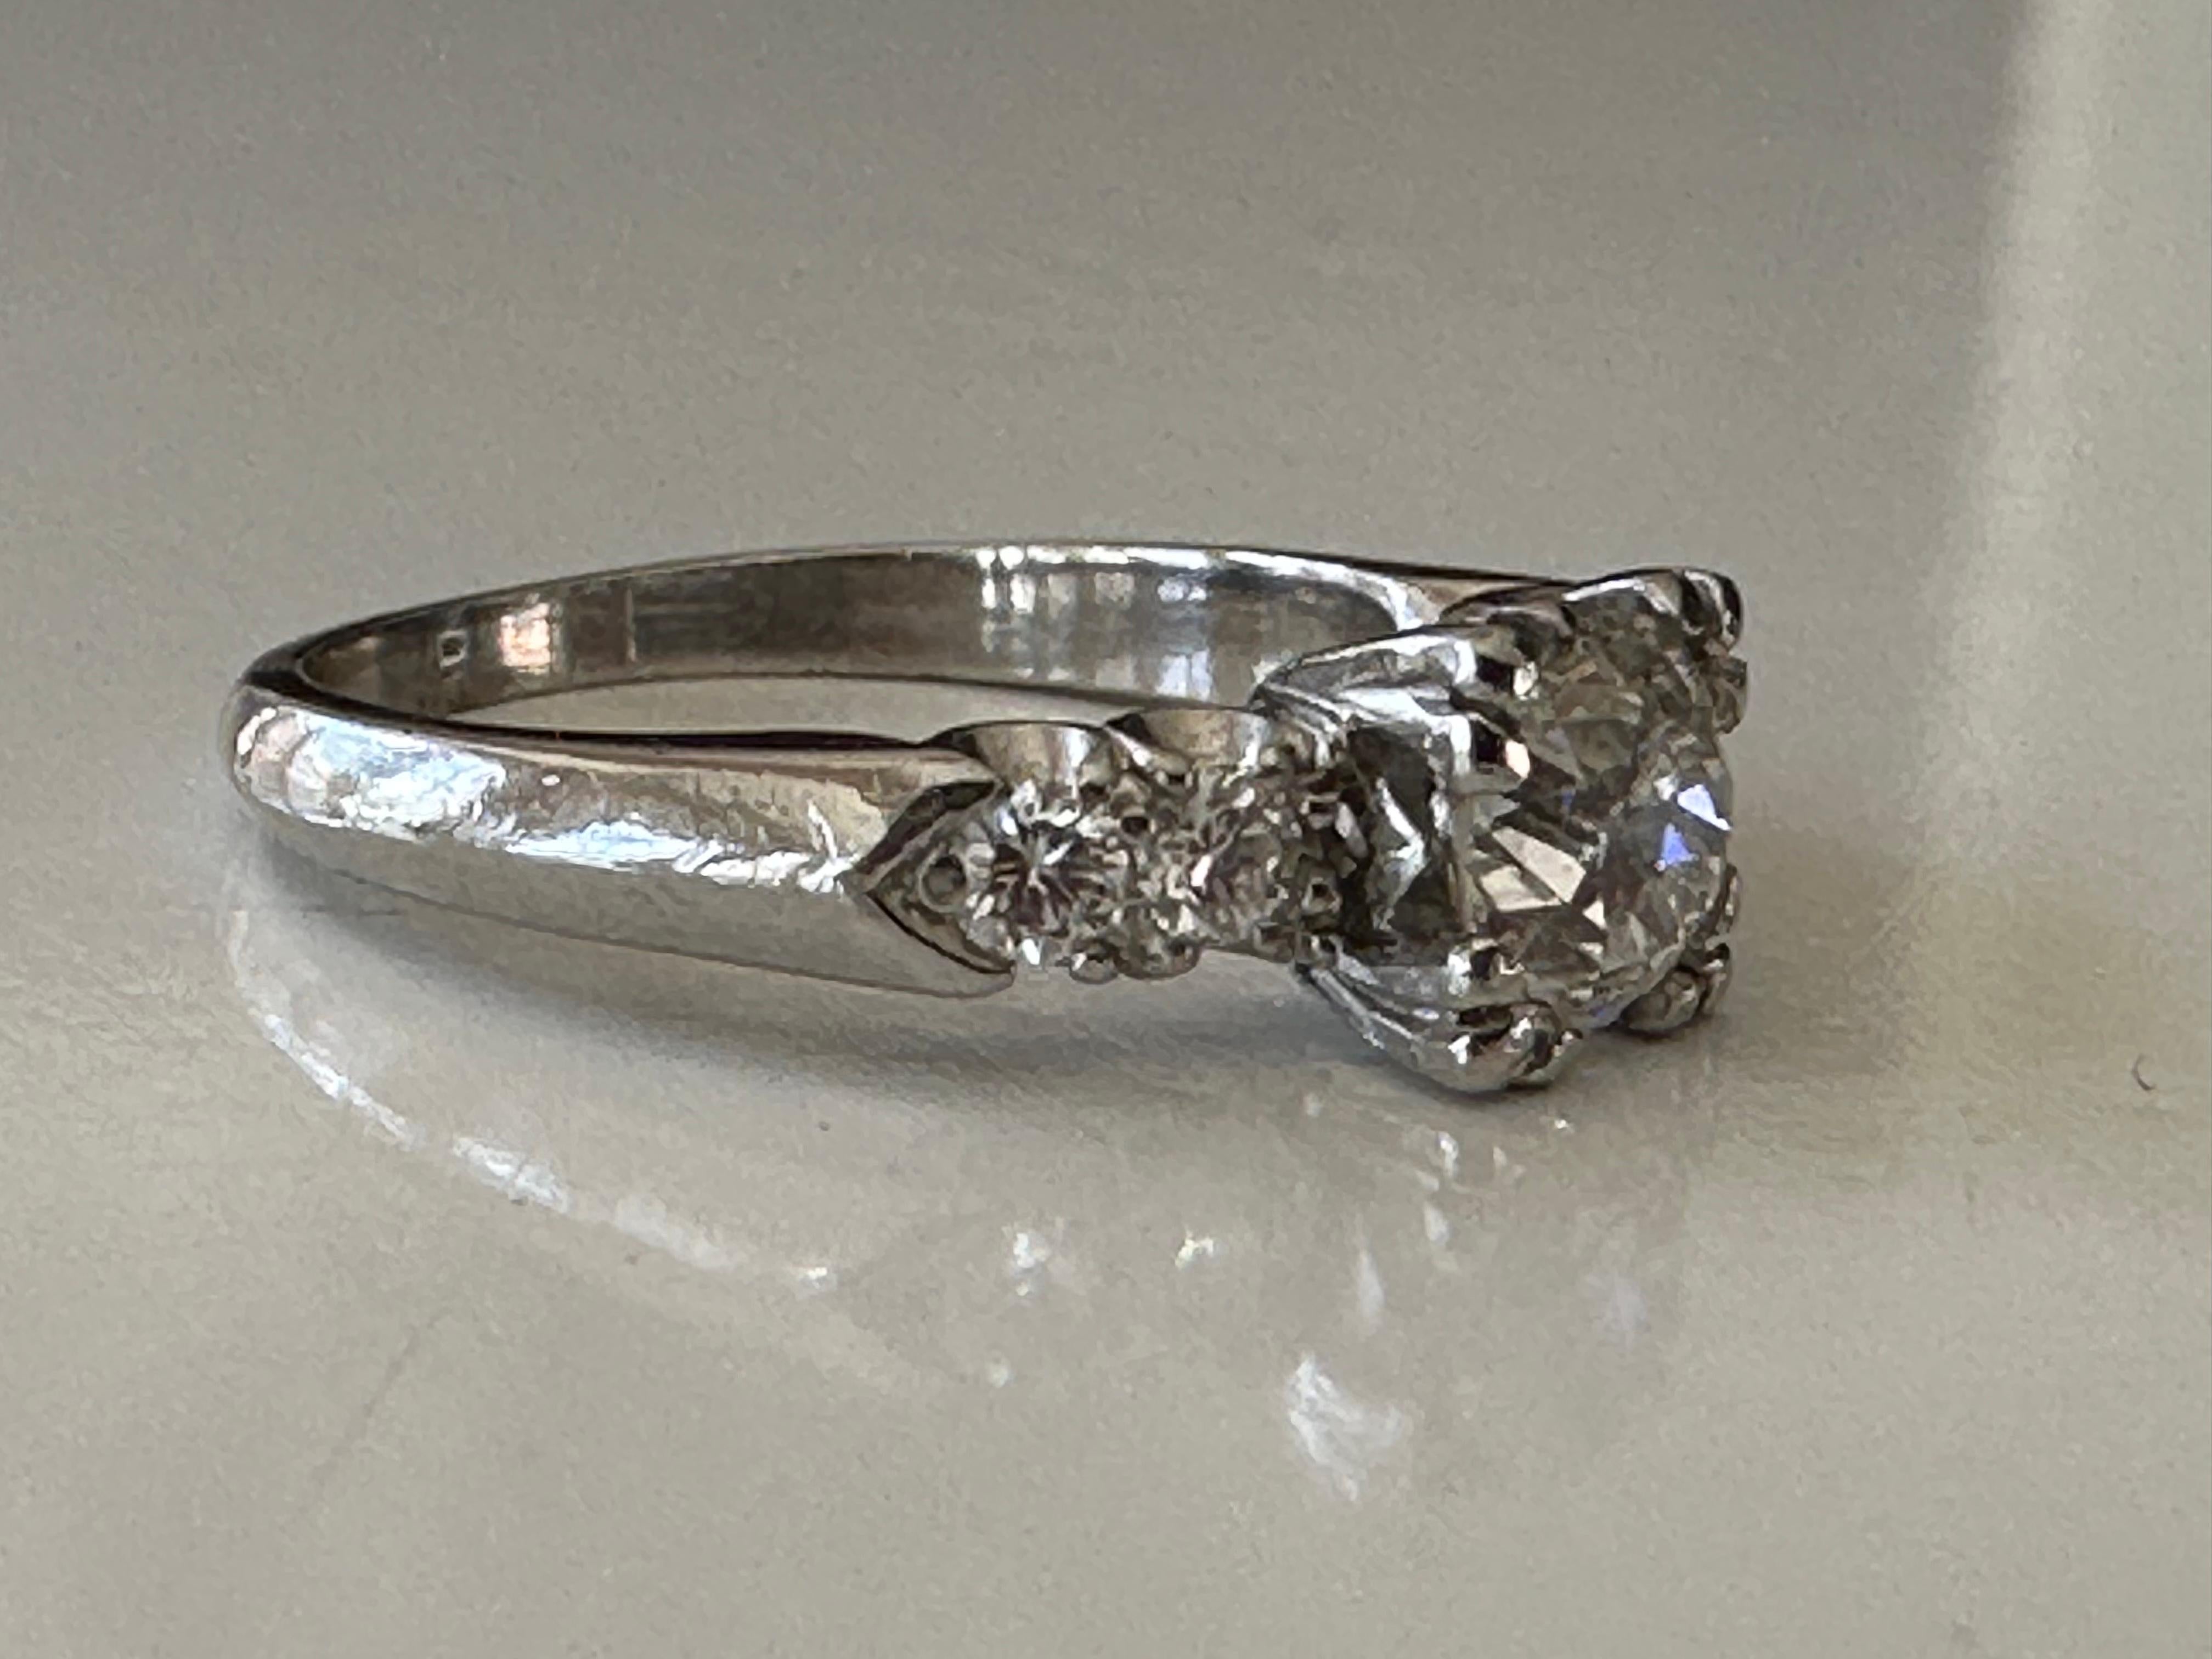 Handcrafted in platinum, this stunning mid-century ring is designed around an Old European cut diamond center stone measuring approximately 0.62 carats, G color, SI2 clarity, and flanked by four single cut diamonds, two on each side, totaling